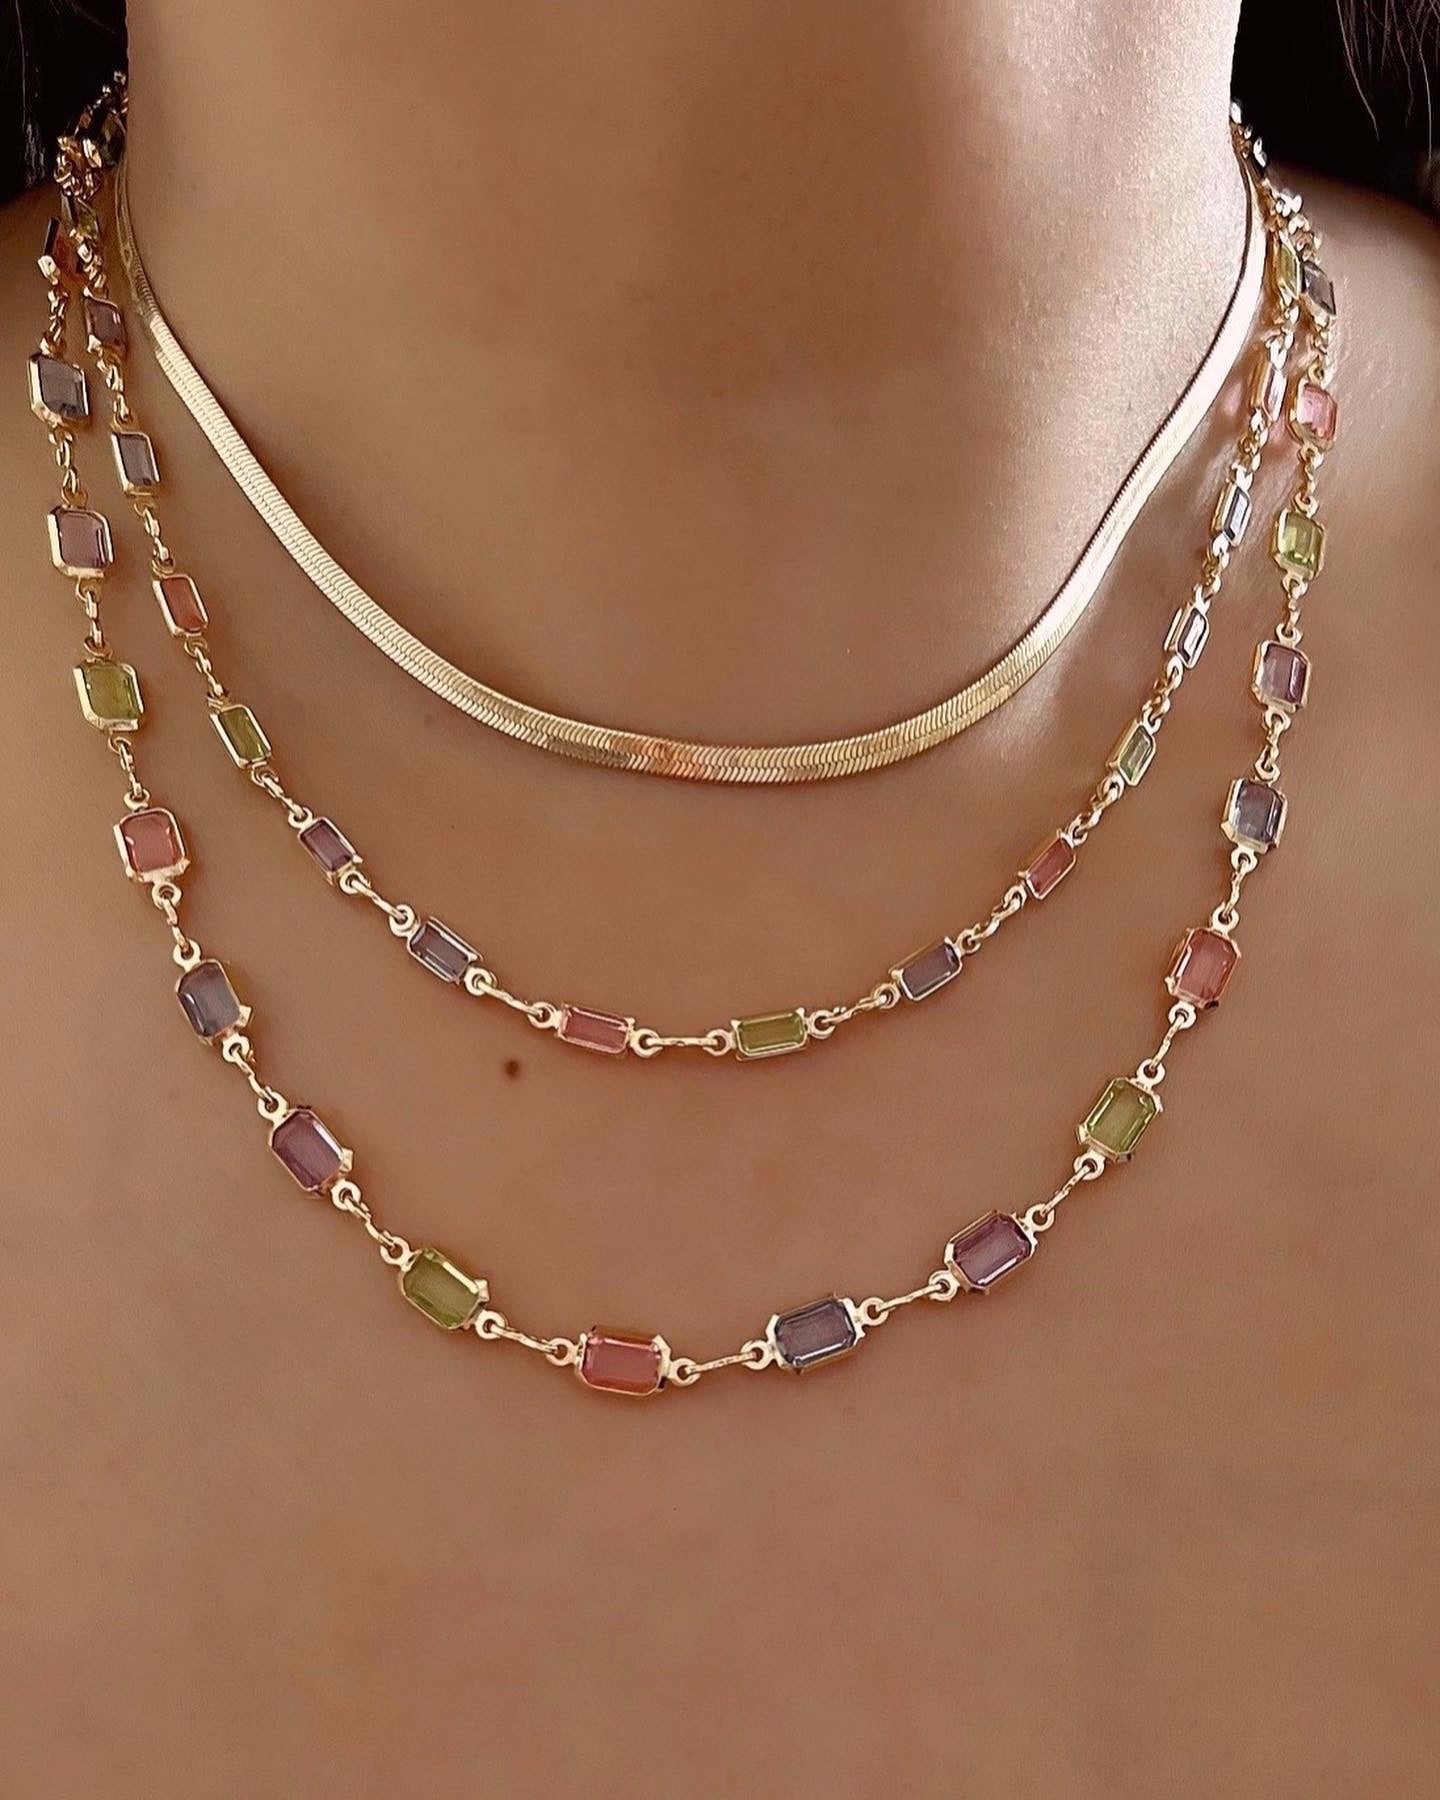 Gold fill necklace in pink, blue and purple bezel gems on a model